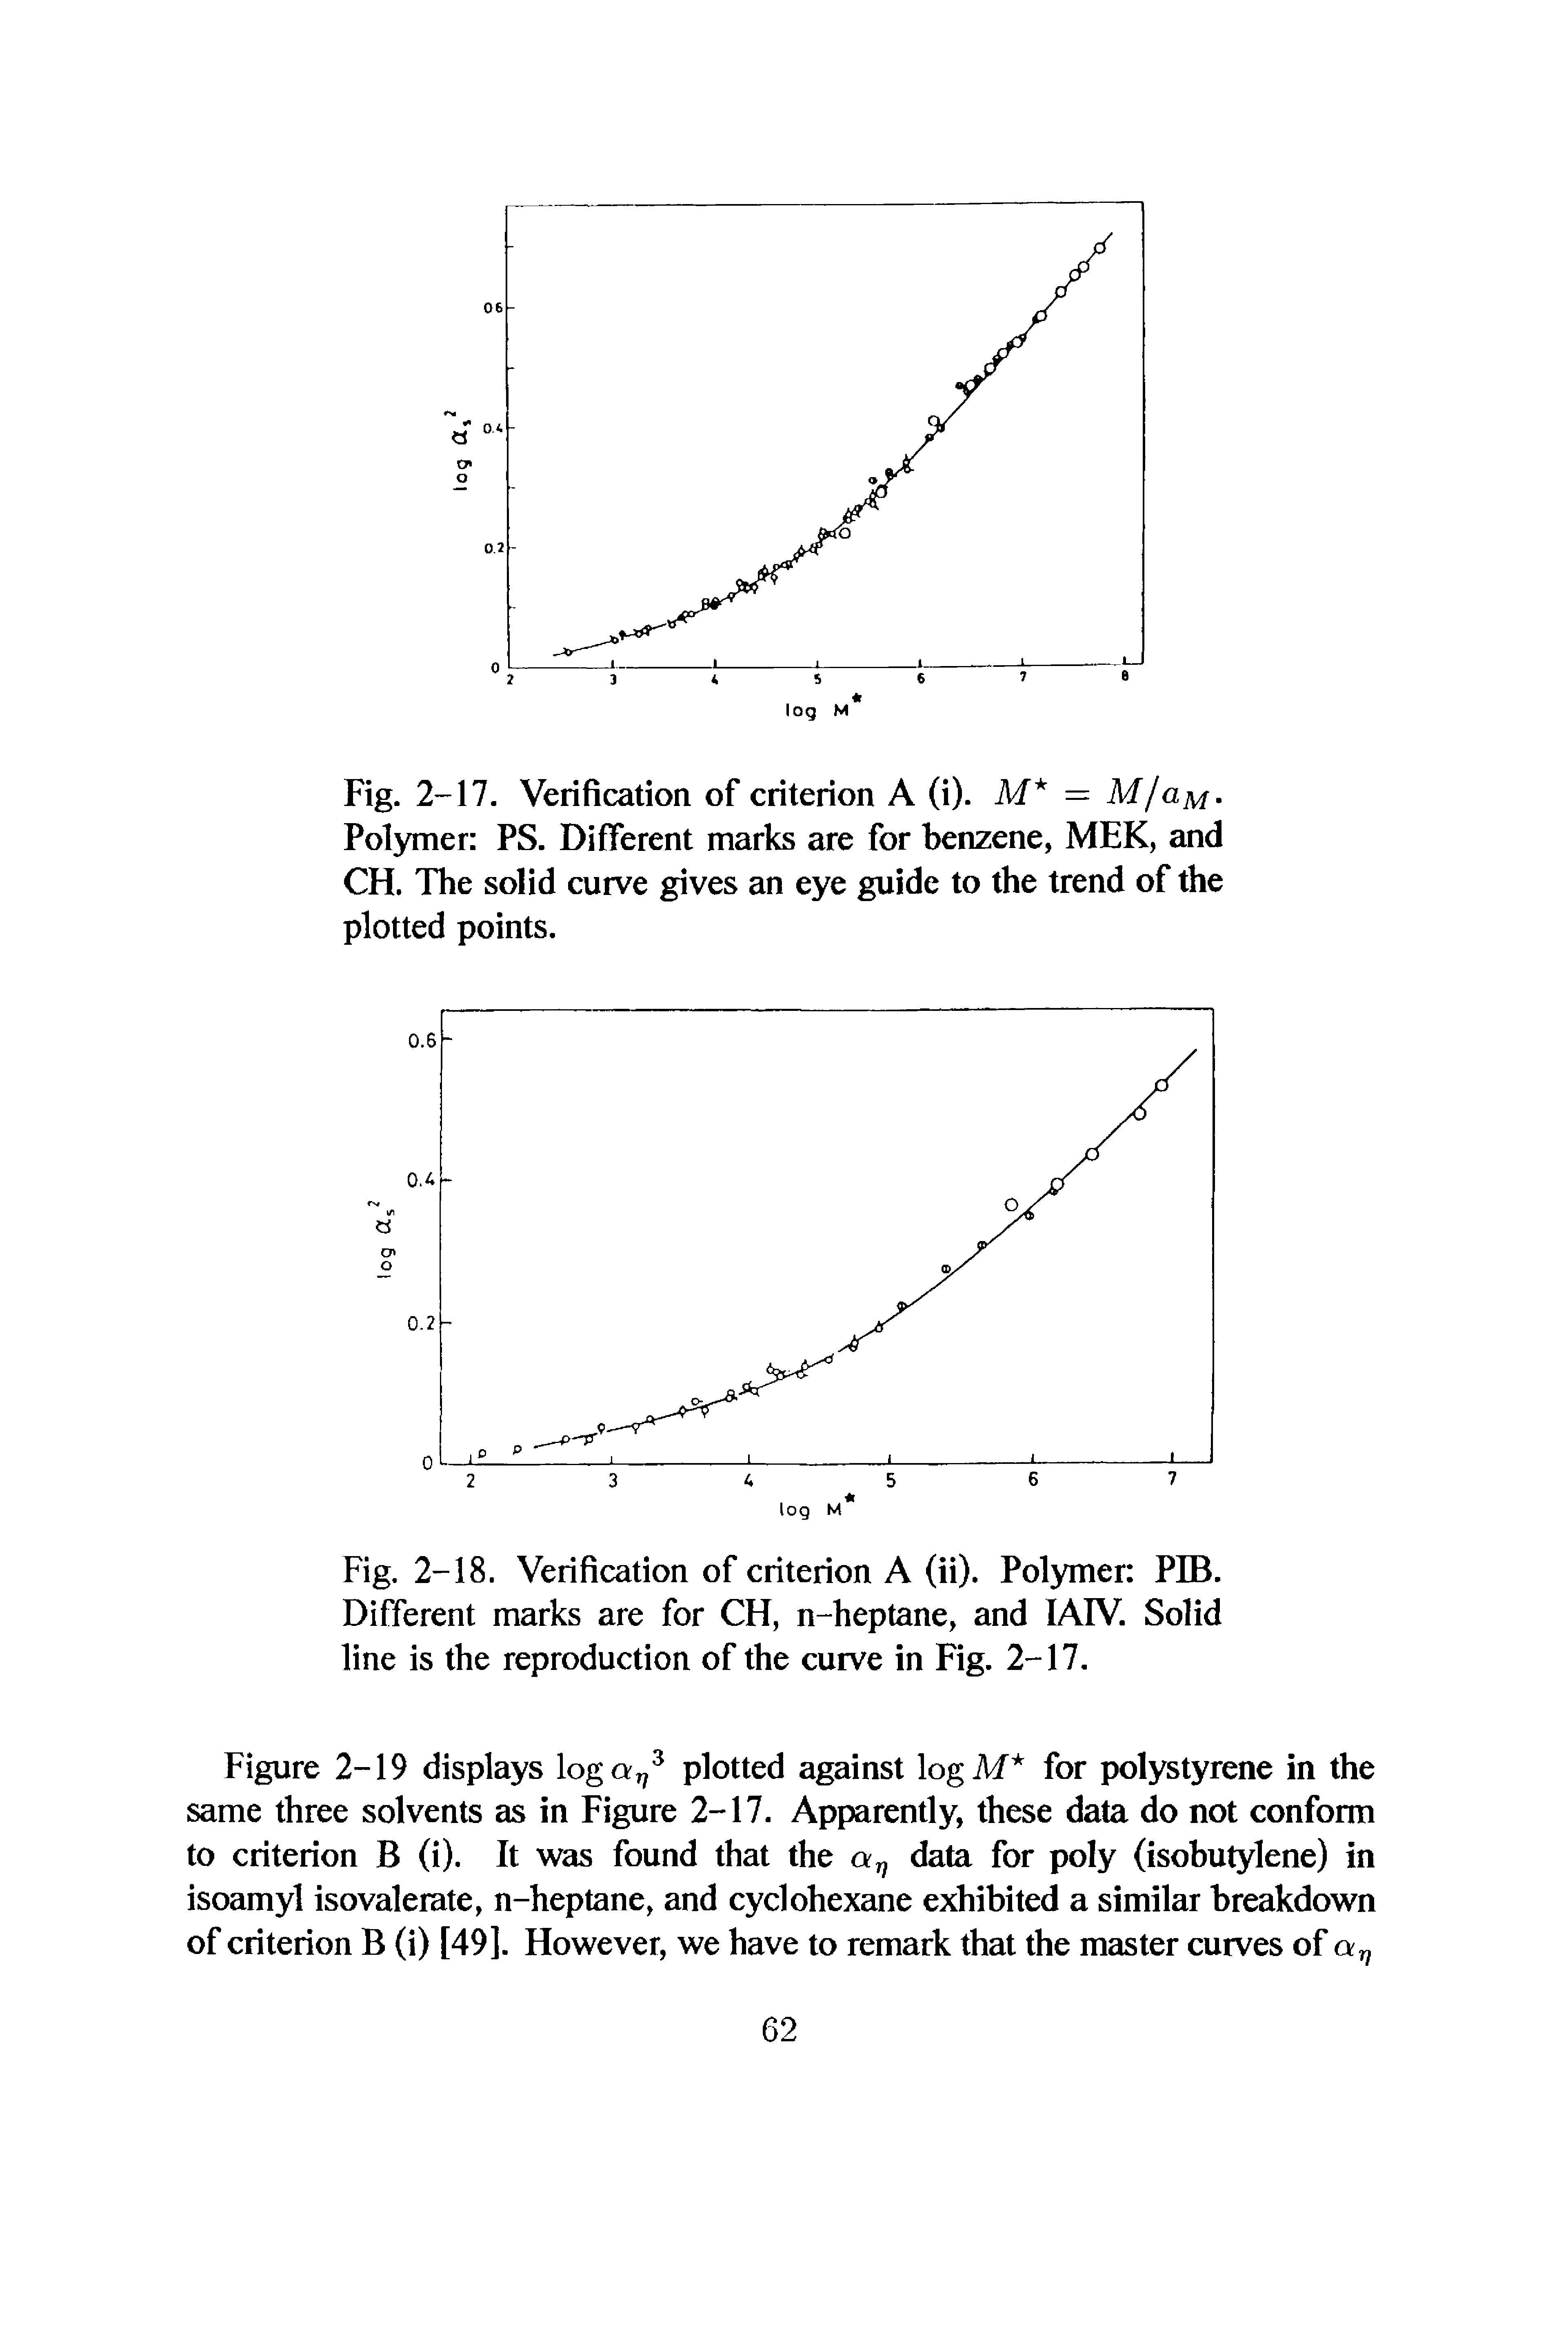 Figure 2-19 displays logo, plotted against logM for polystyrene in the same three solvents as in Figure 2-17. Apparently, these data do not conform to criterion B (i). It was found that the data for poly (isobutylene) in isoamyl isovalerate, n-heptane, and cyclohexane exhibited a similar breakdown of criterion B (i) [49]. However, we have to remark that the master curves of a,...